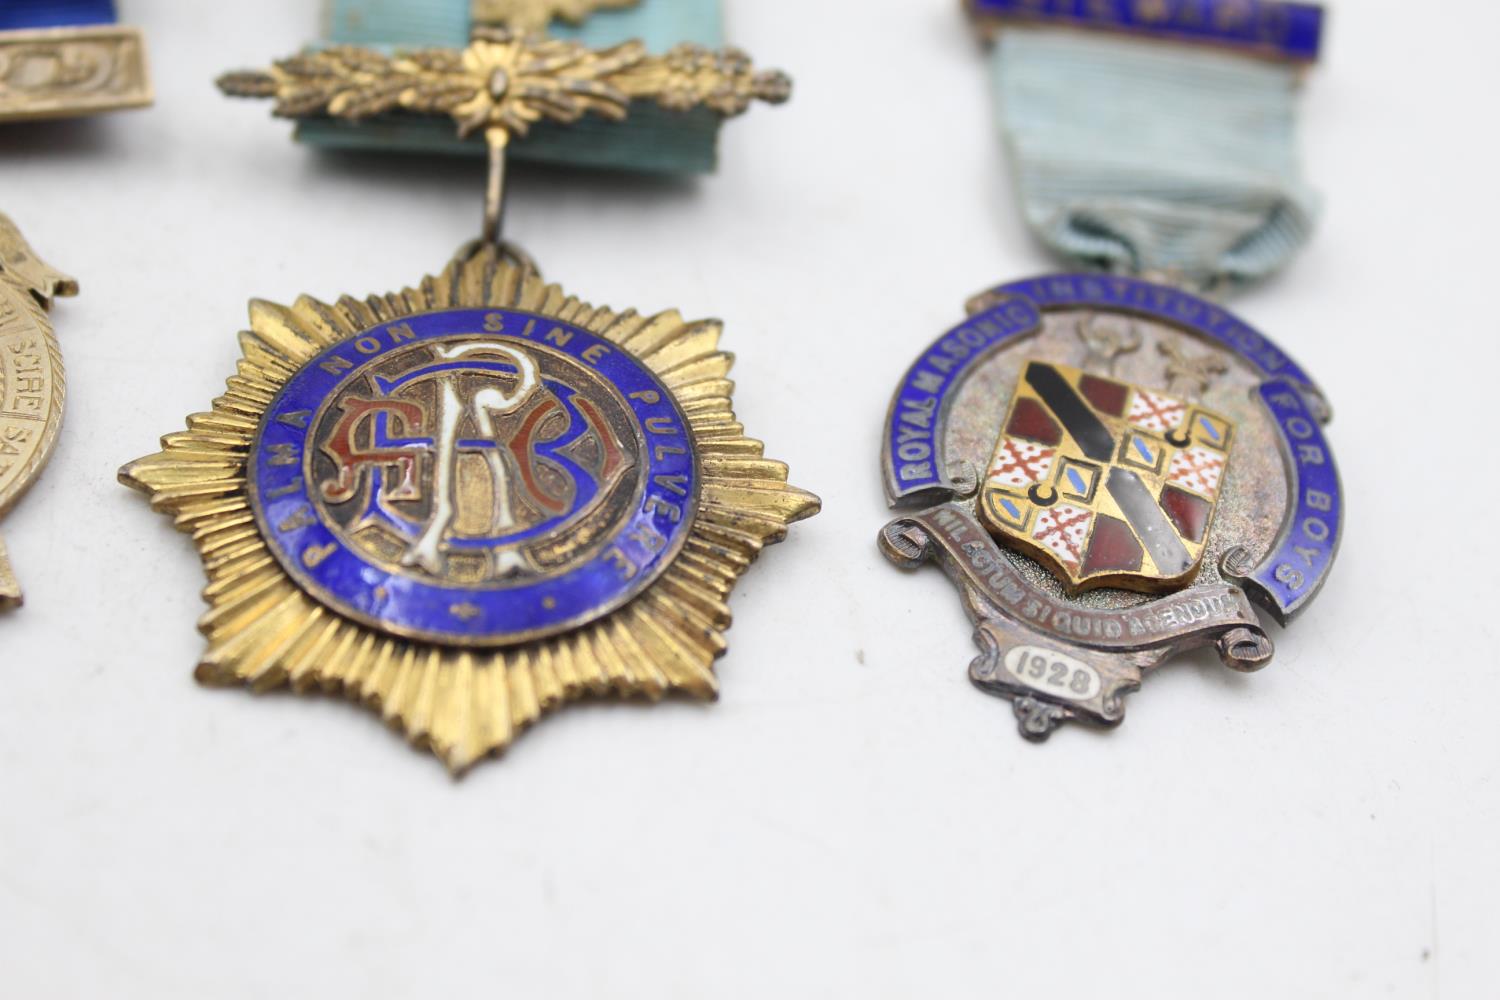 4 x Vintage .925 STERLING SILVER Masonic & R.A.O.B Medals / Jewels (110g) Inc Founder, Royal Arch - Image 7 of 8